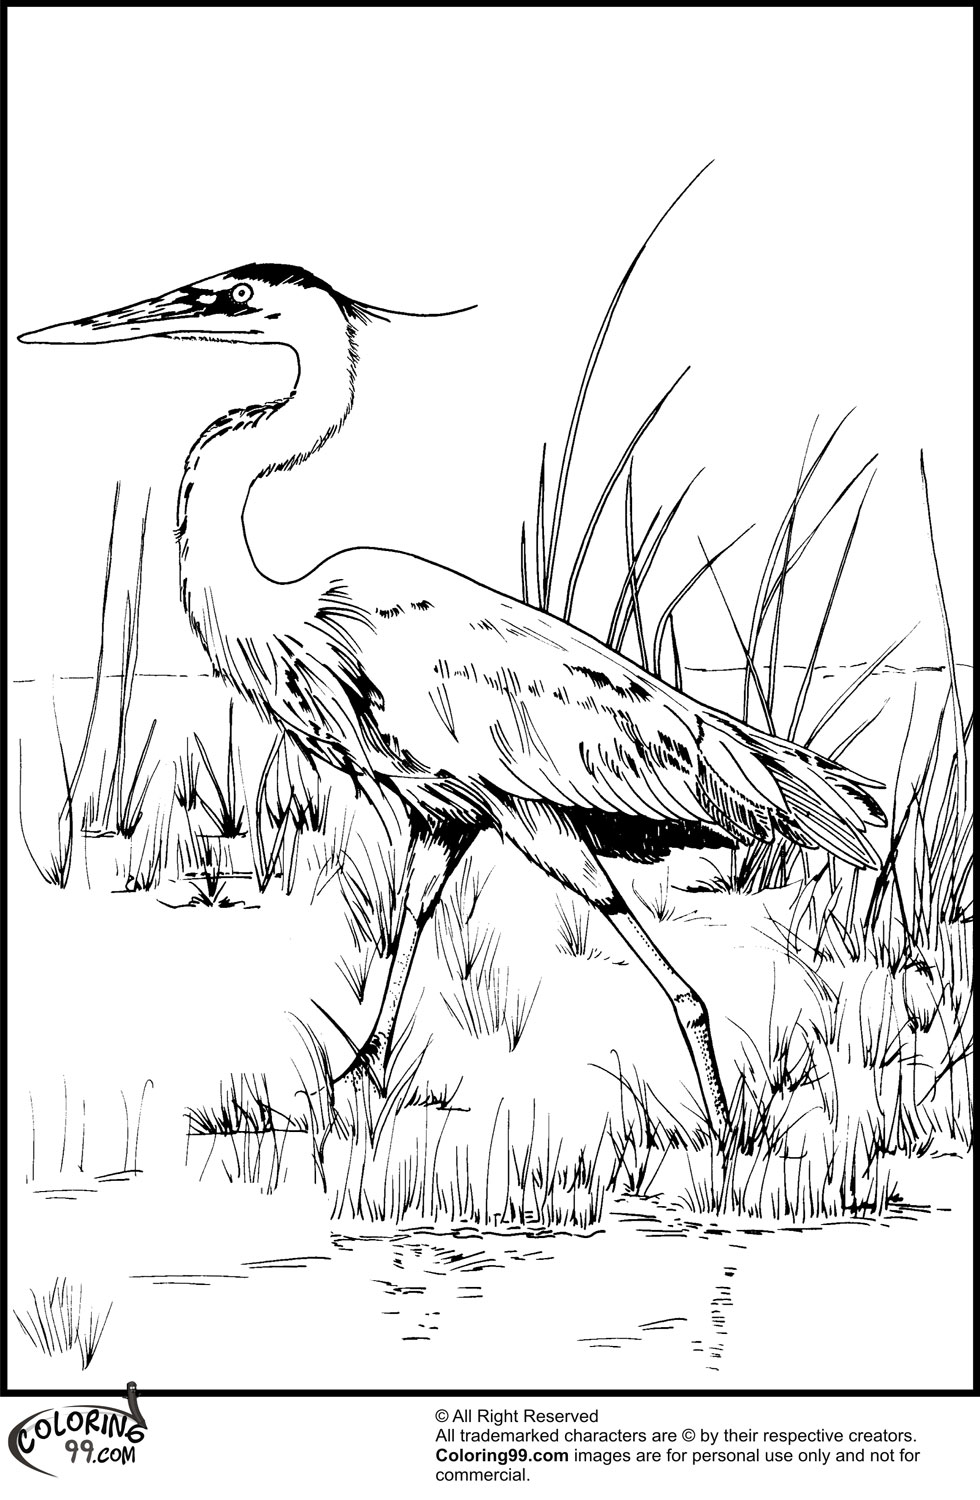 Stork Coloring Pages | Team colors